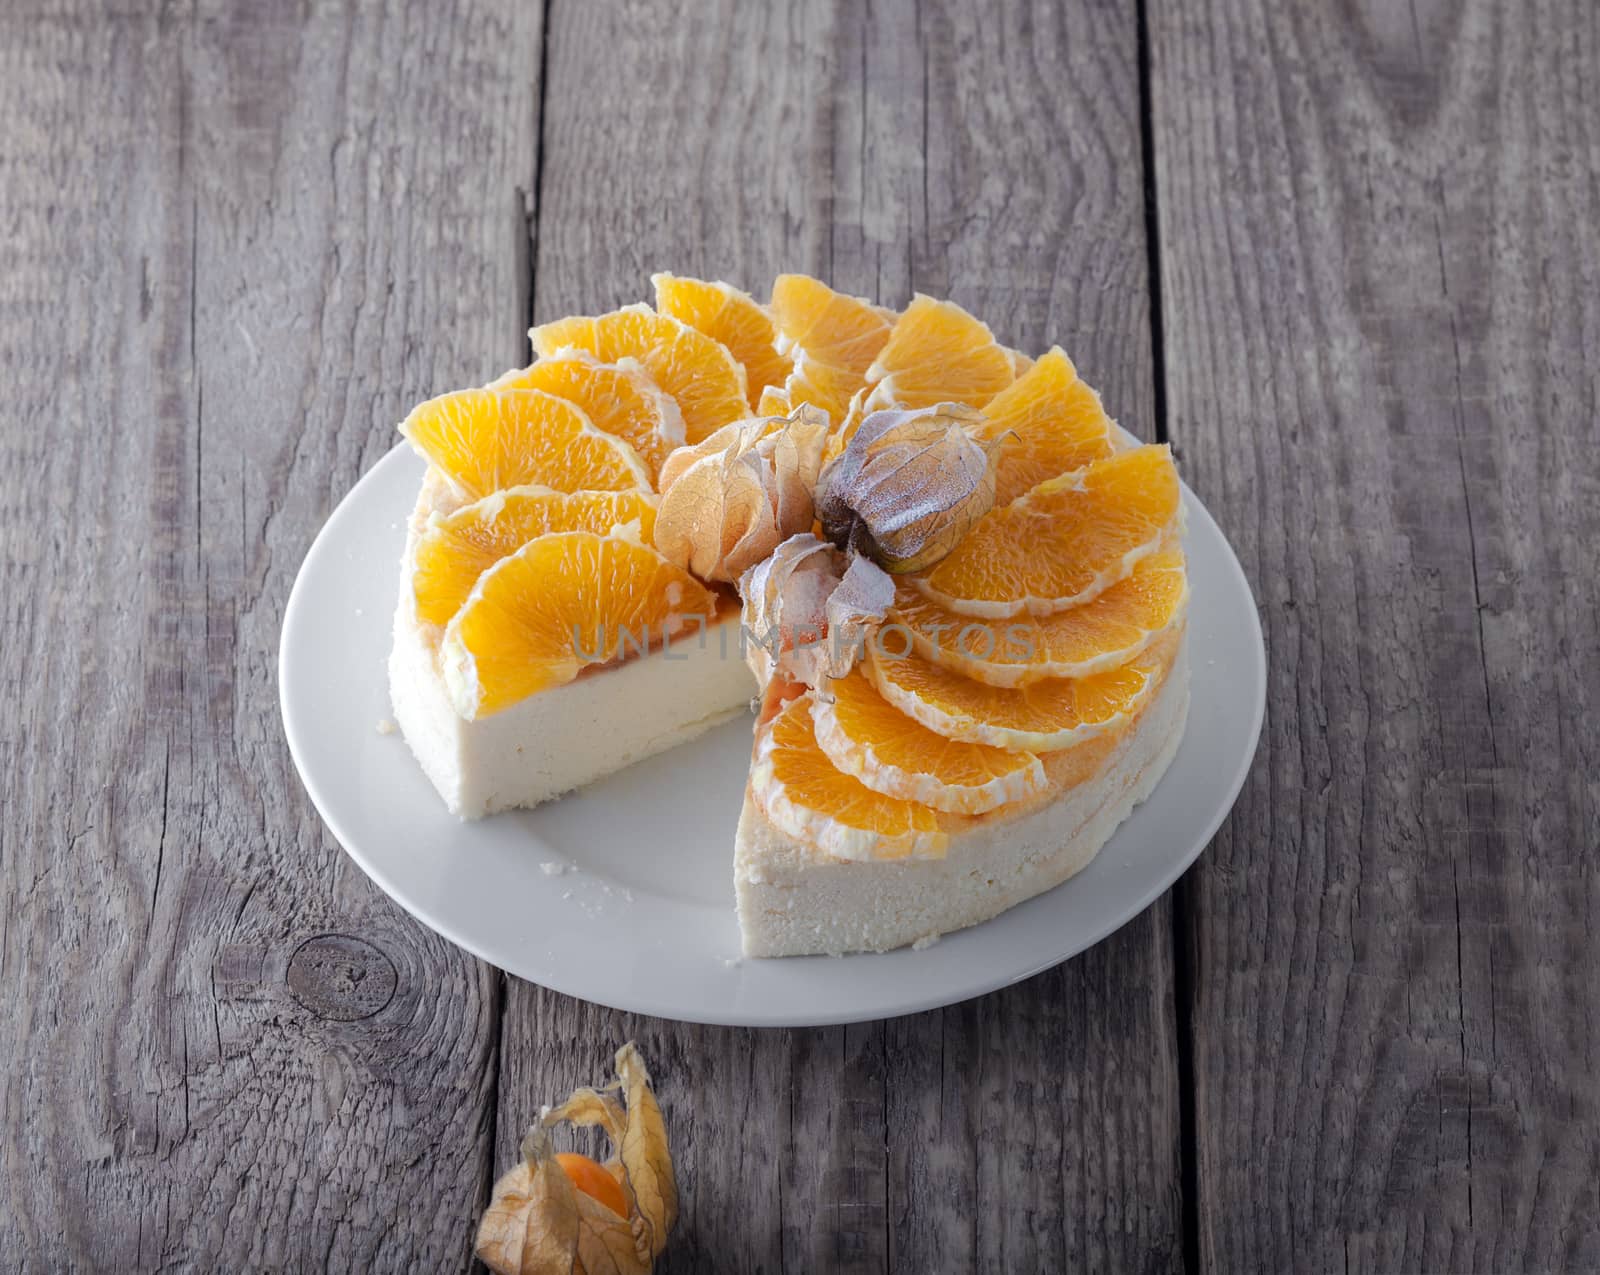 Cheesecake decorated with oranges and physalis on a wooden surface.